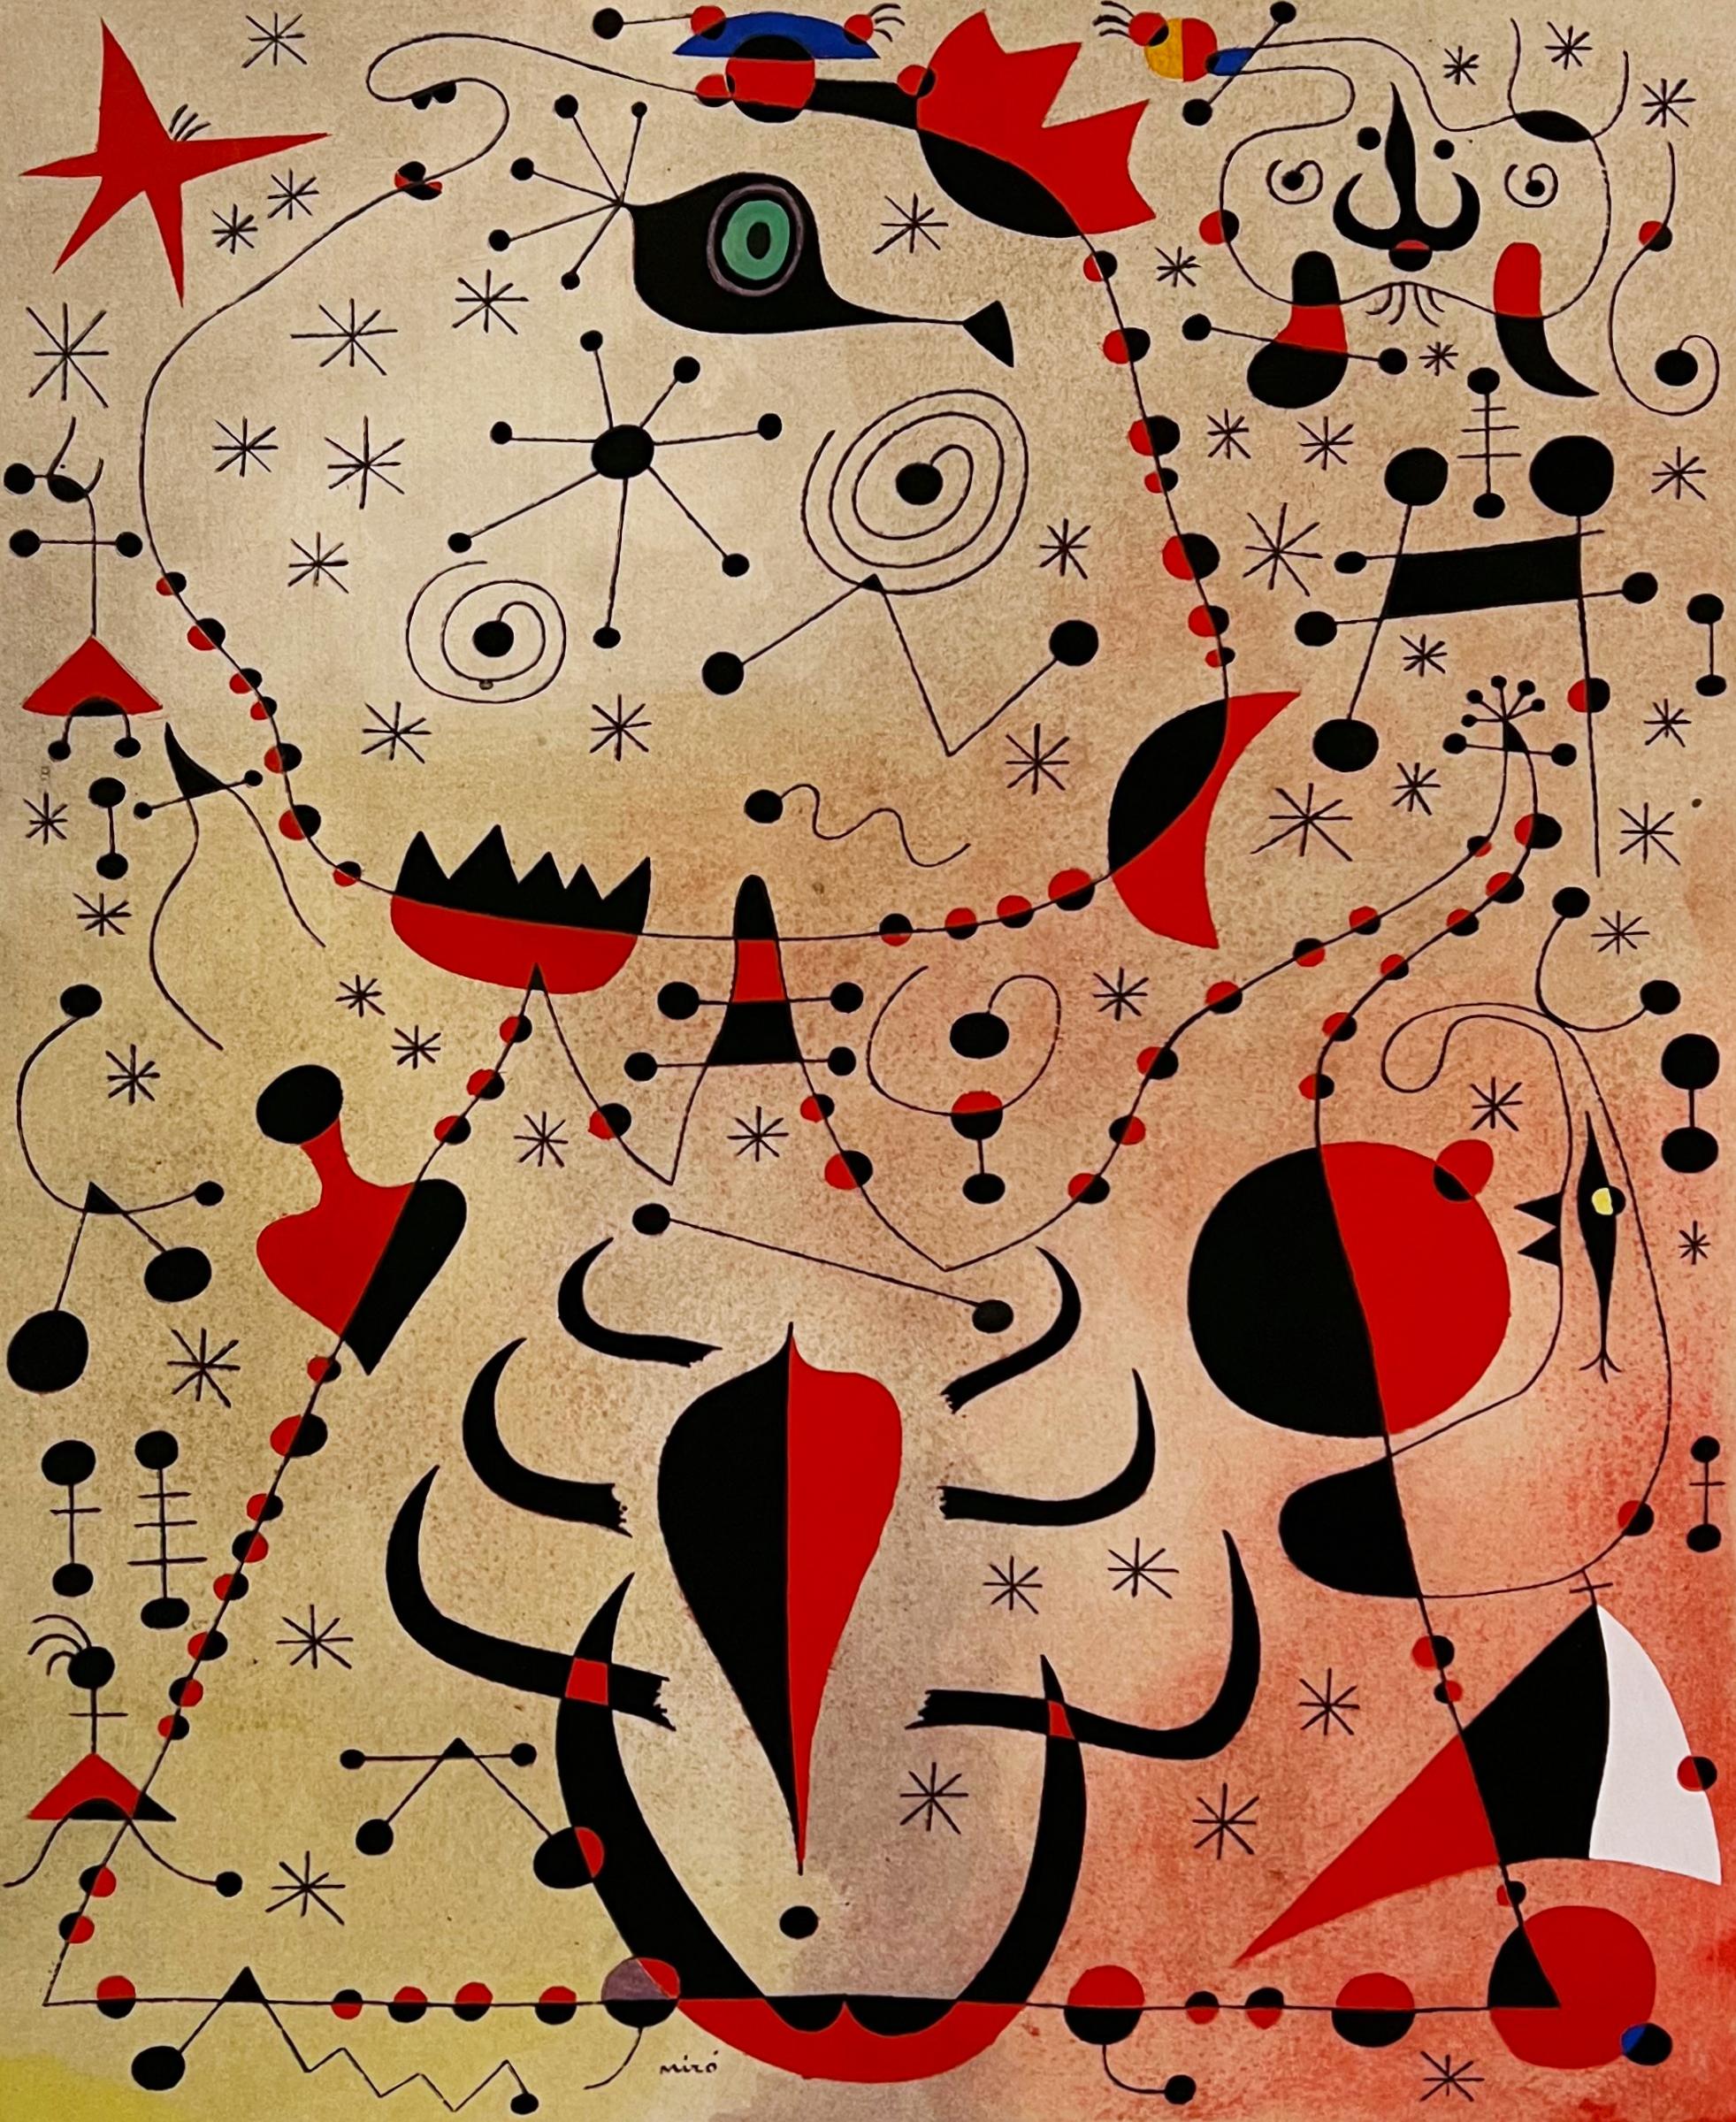 (after) Joan Miró Abstract Print - Joan Miro (after) Plate XXI from 1959 Constellations